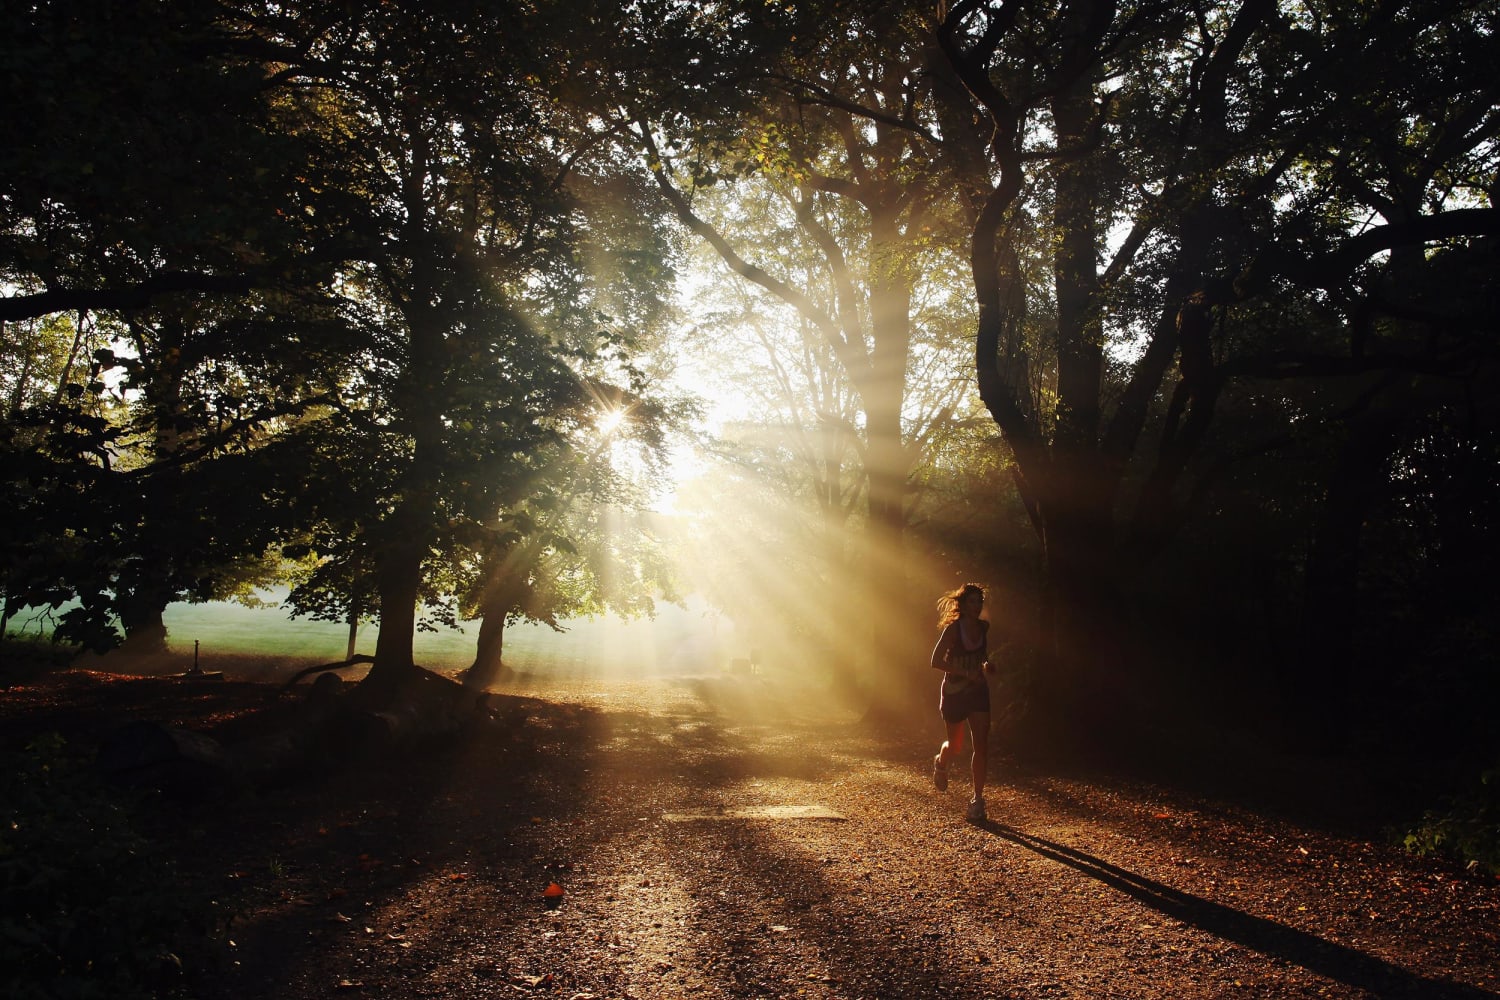 Morning Light Could Be Key to Leaner Physique, Study Finds